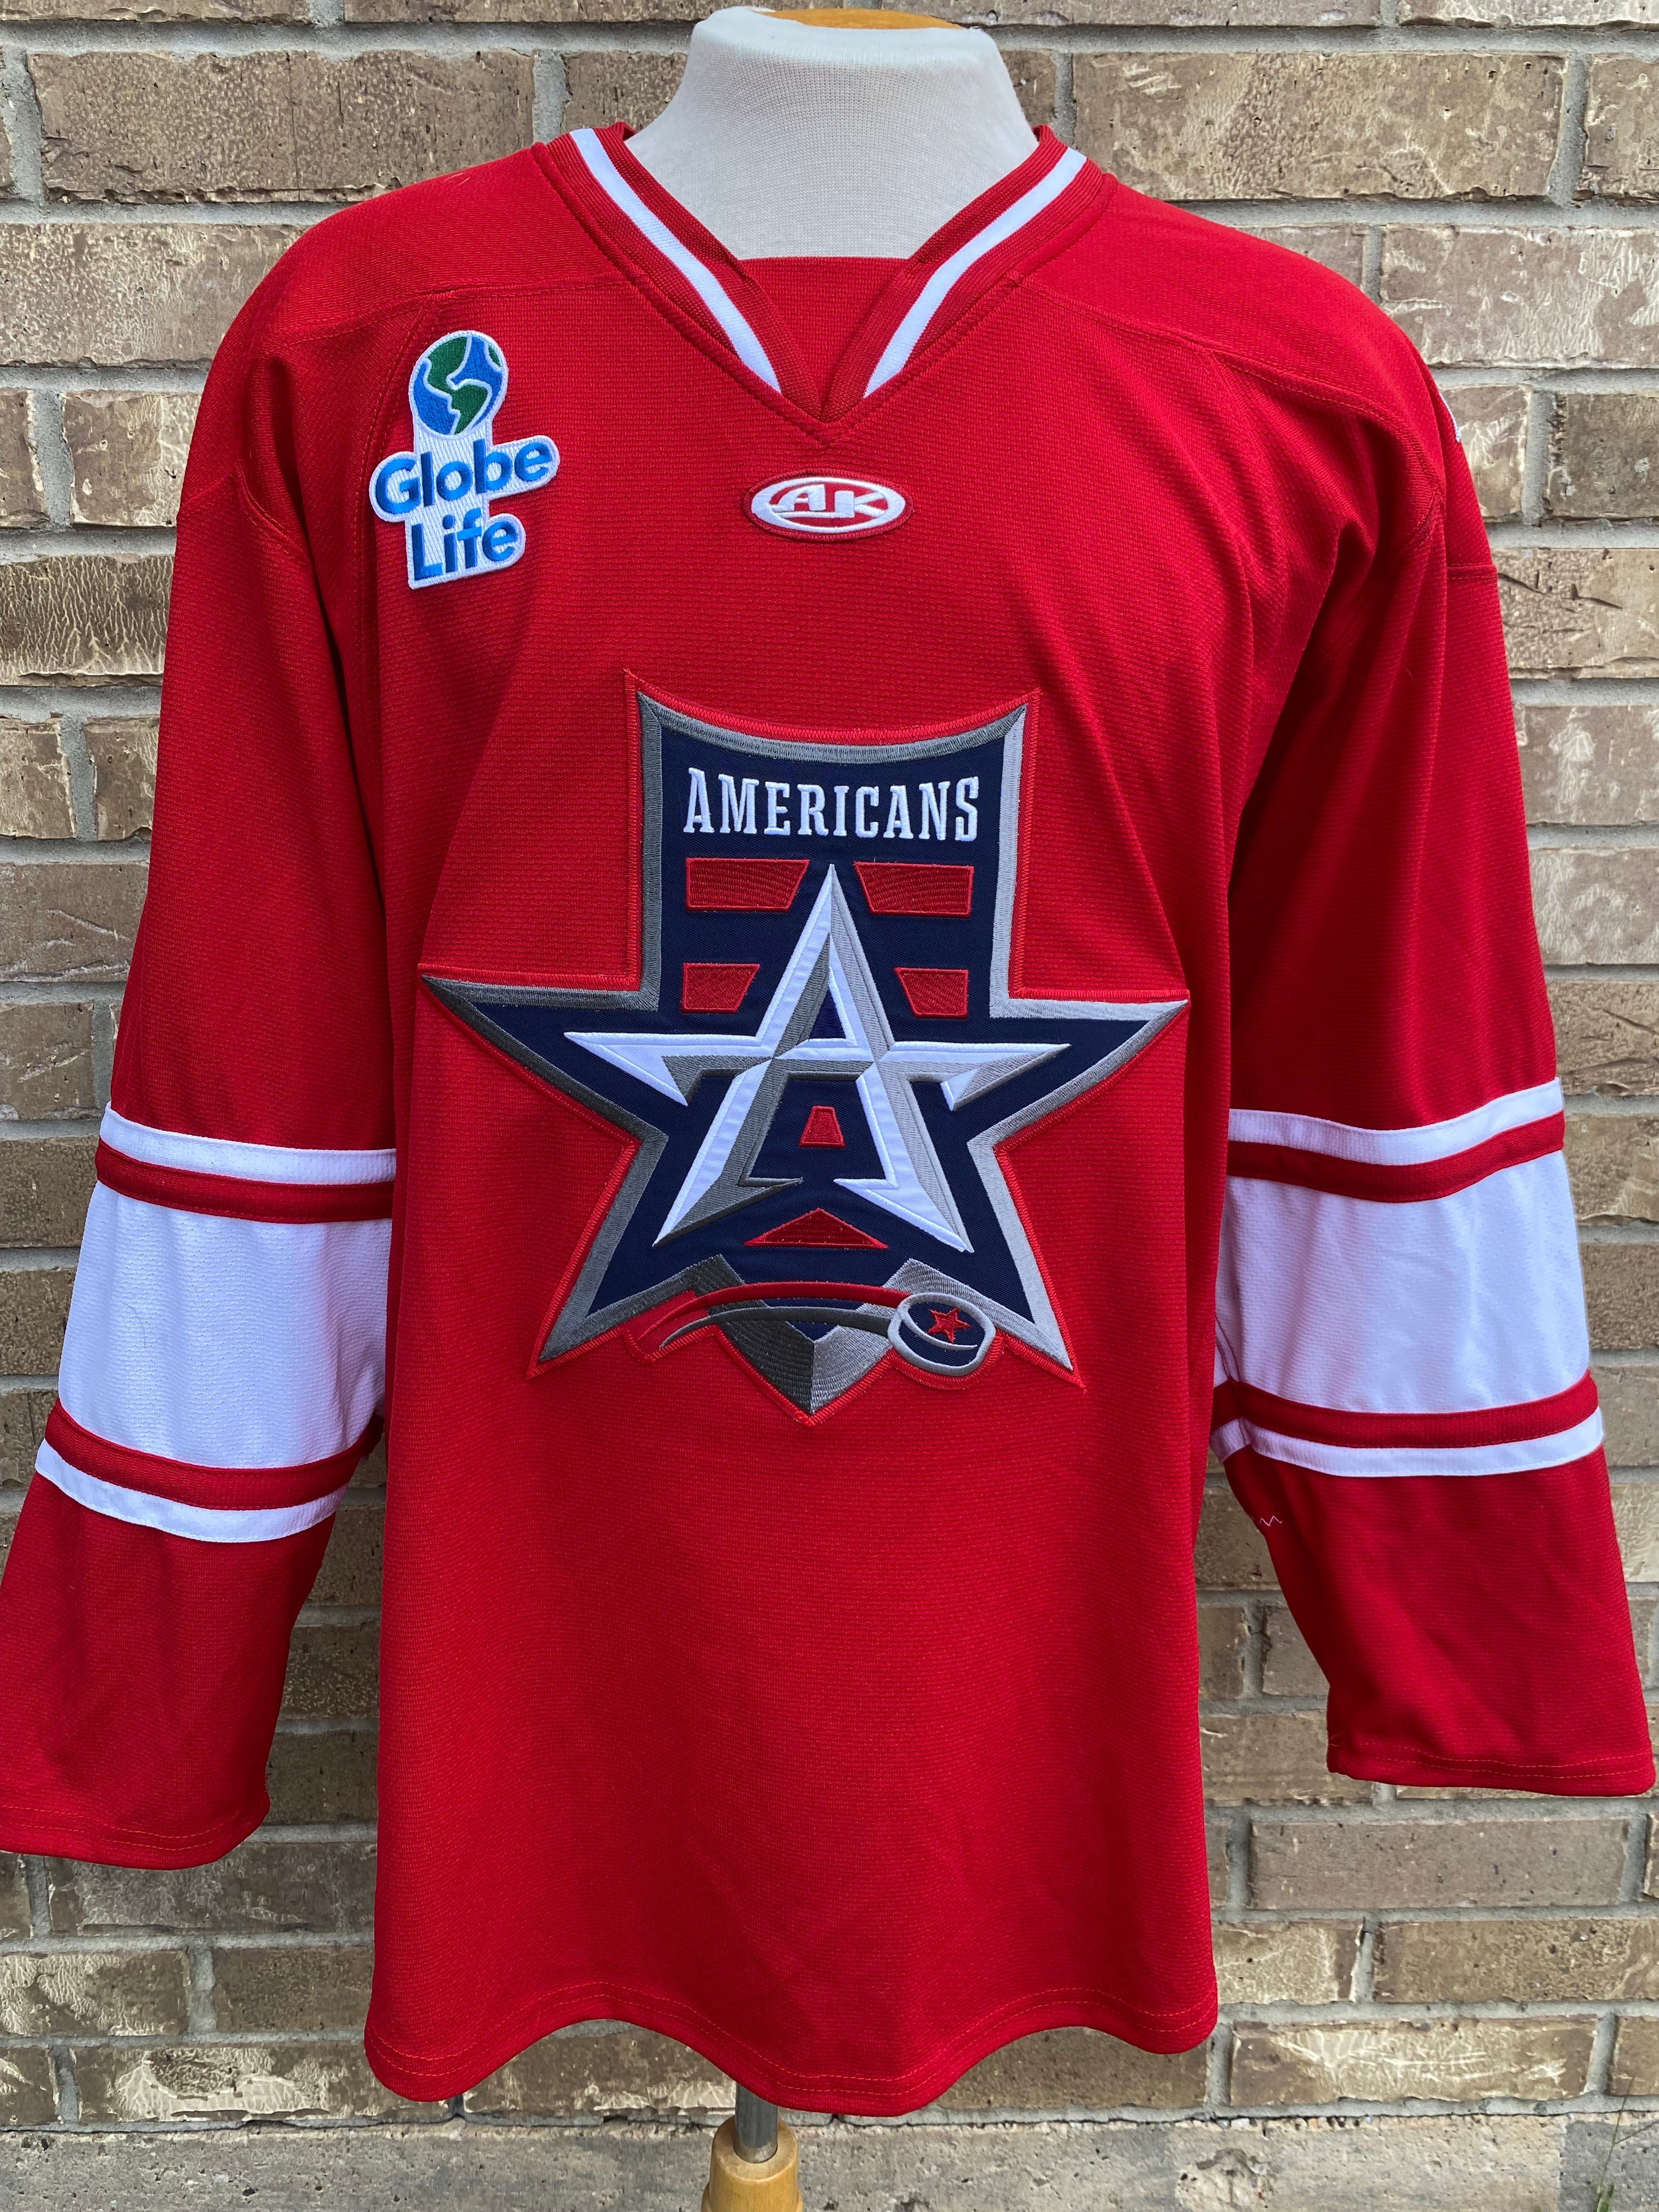 Kansas City Mavericks on X: Our gray jersey auction rolls on today. Get  your mitts on these sweaters now! To start bidding, download the  @DASHauction app on your phone and search 'Kansas